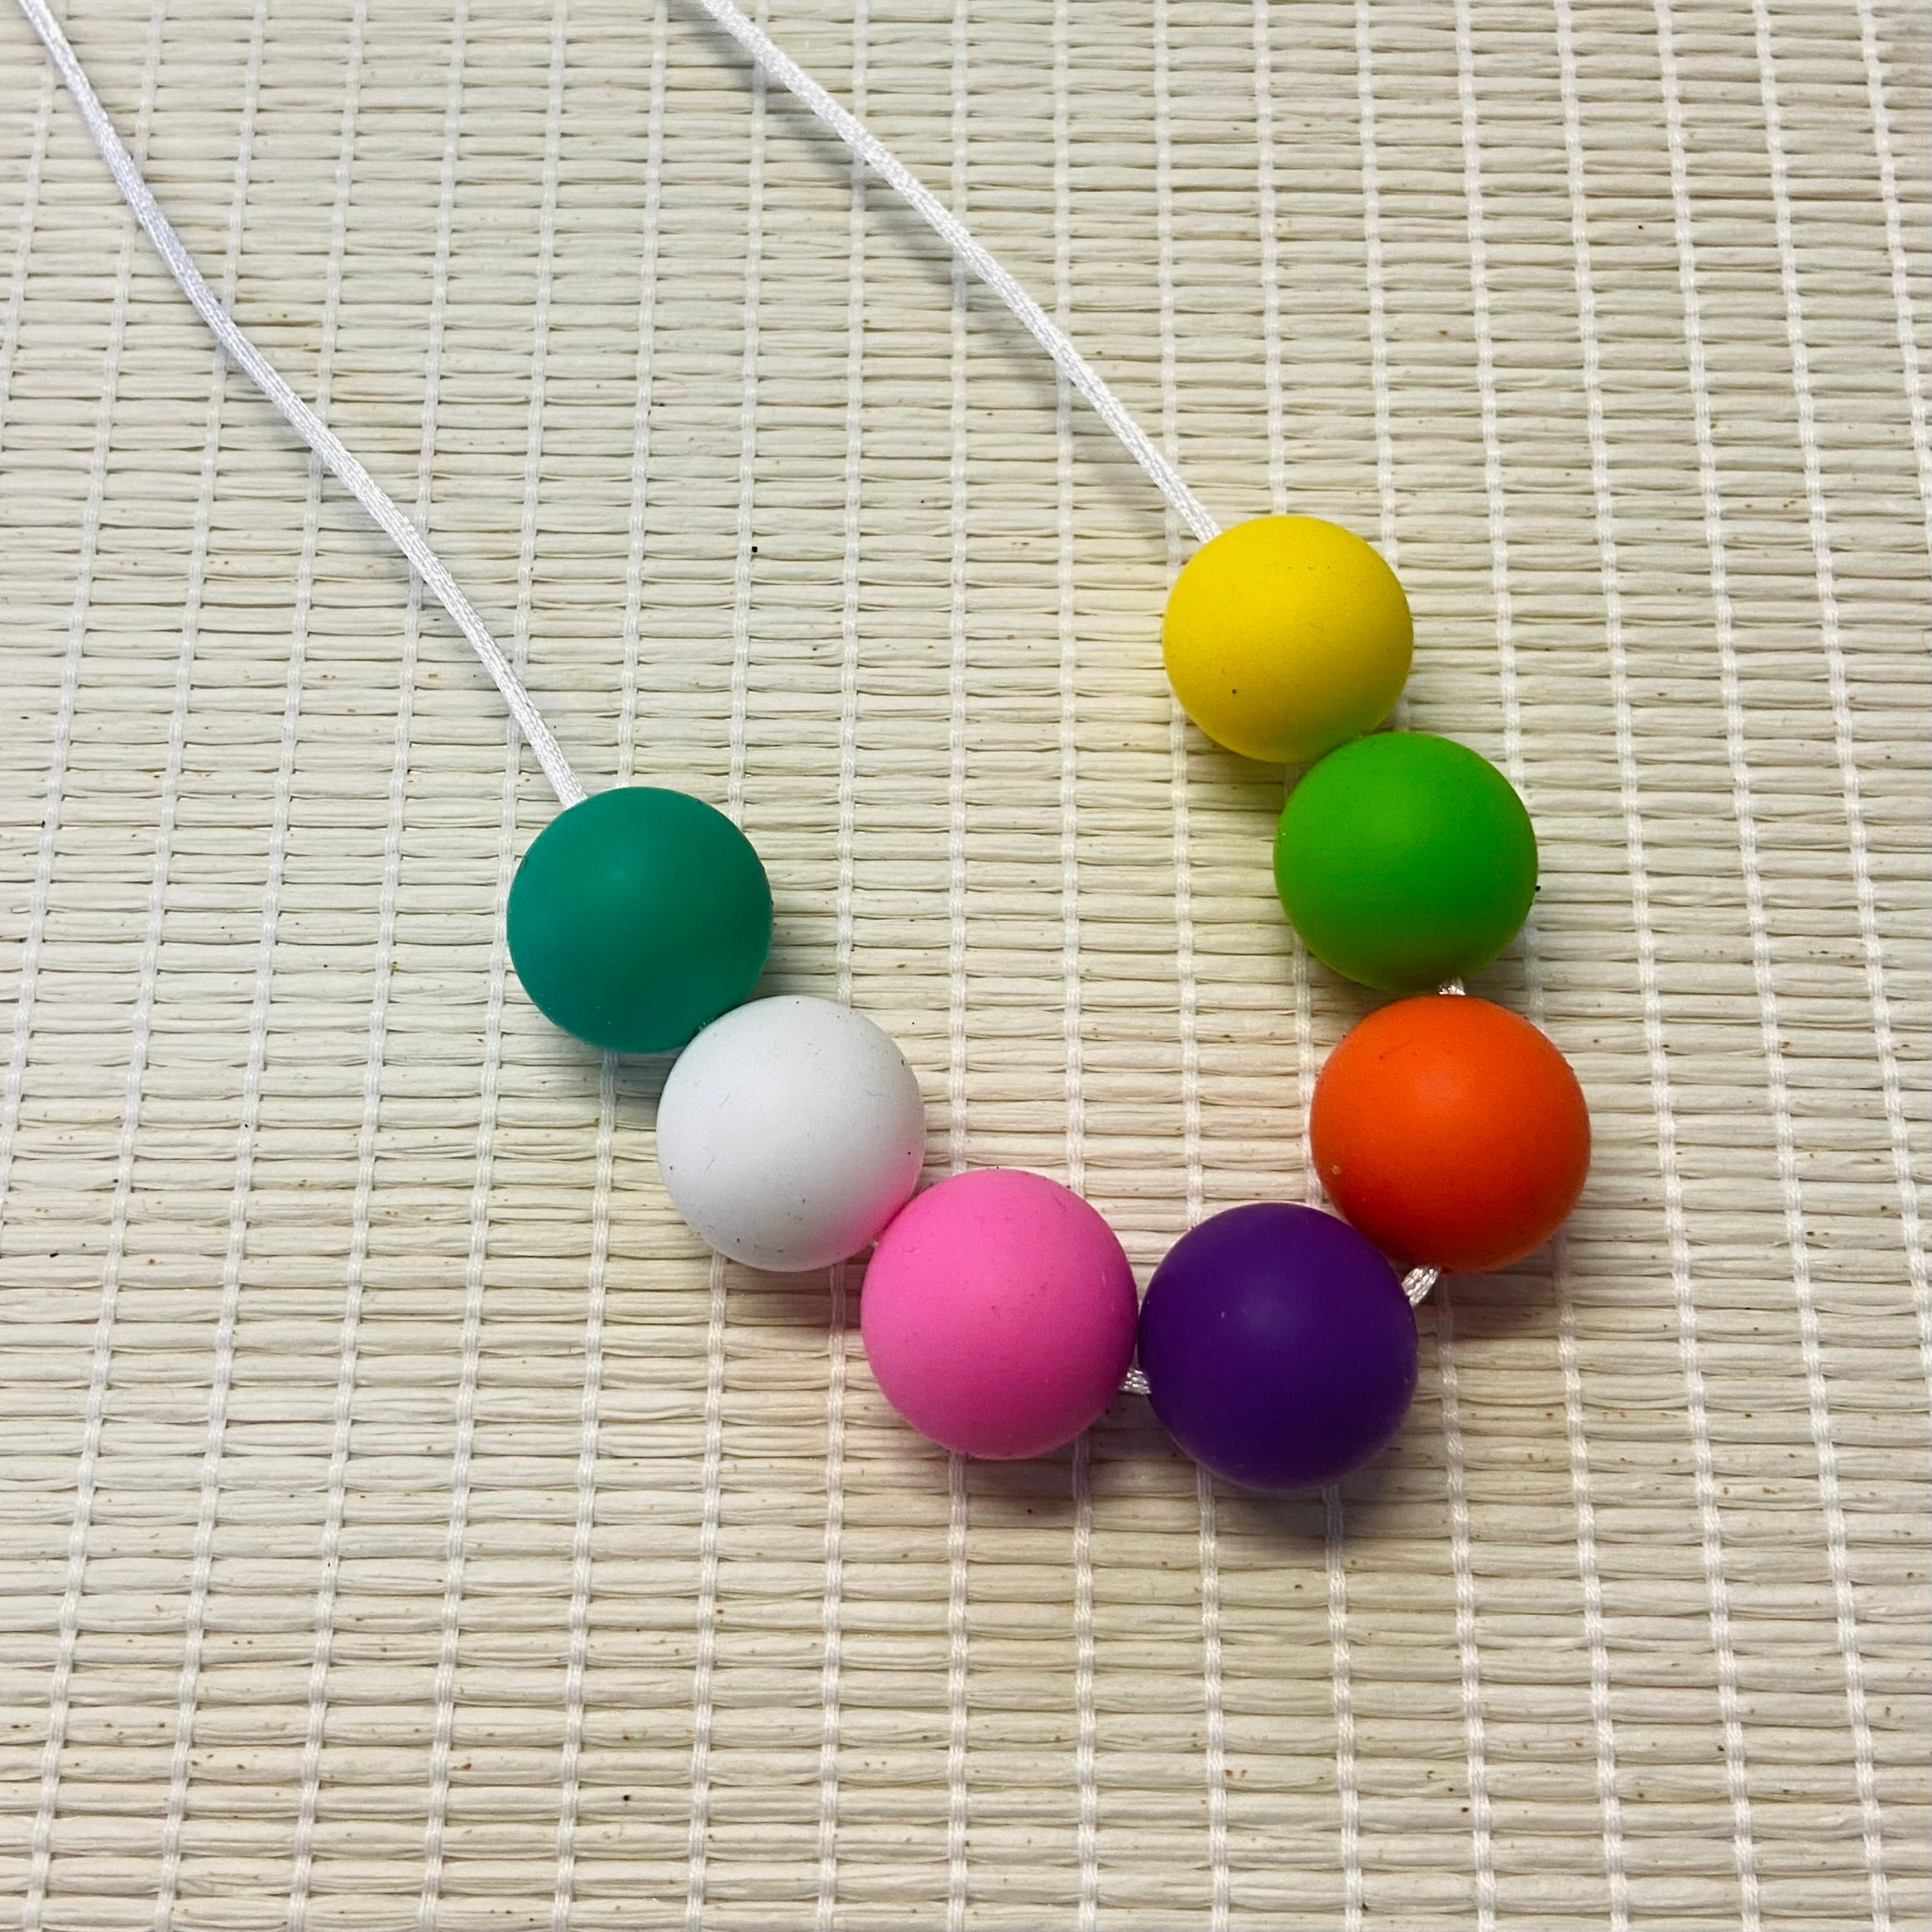 Silicone Necklaces (round beads)